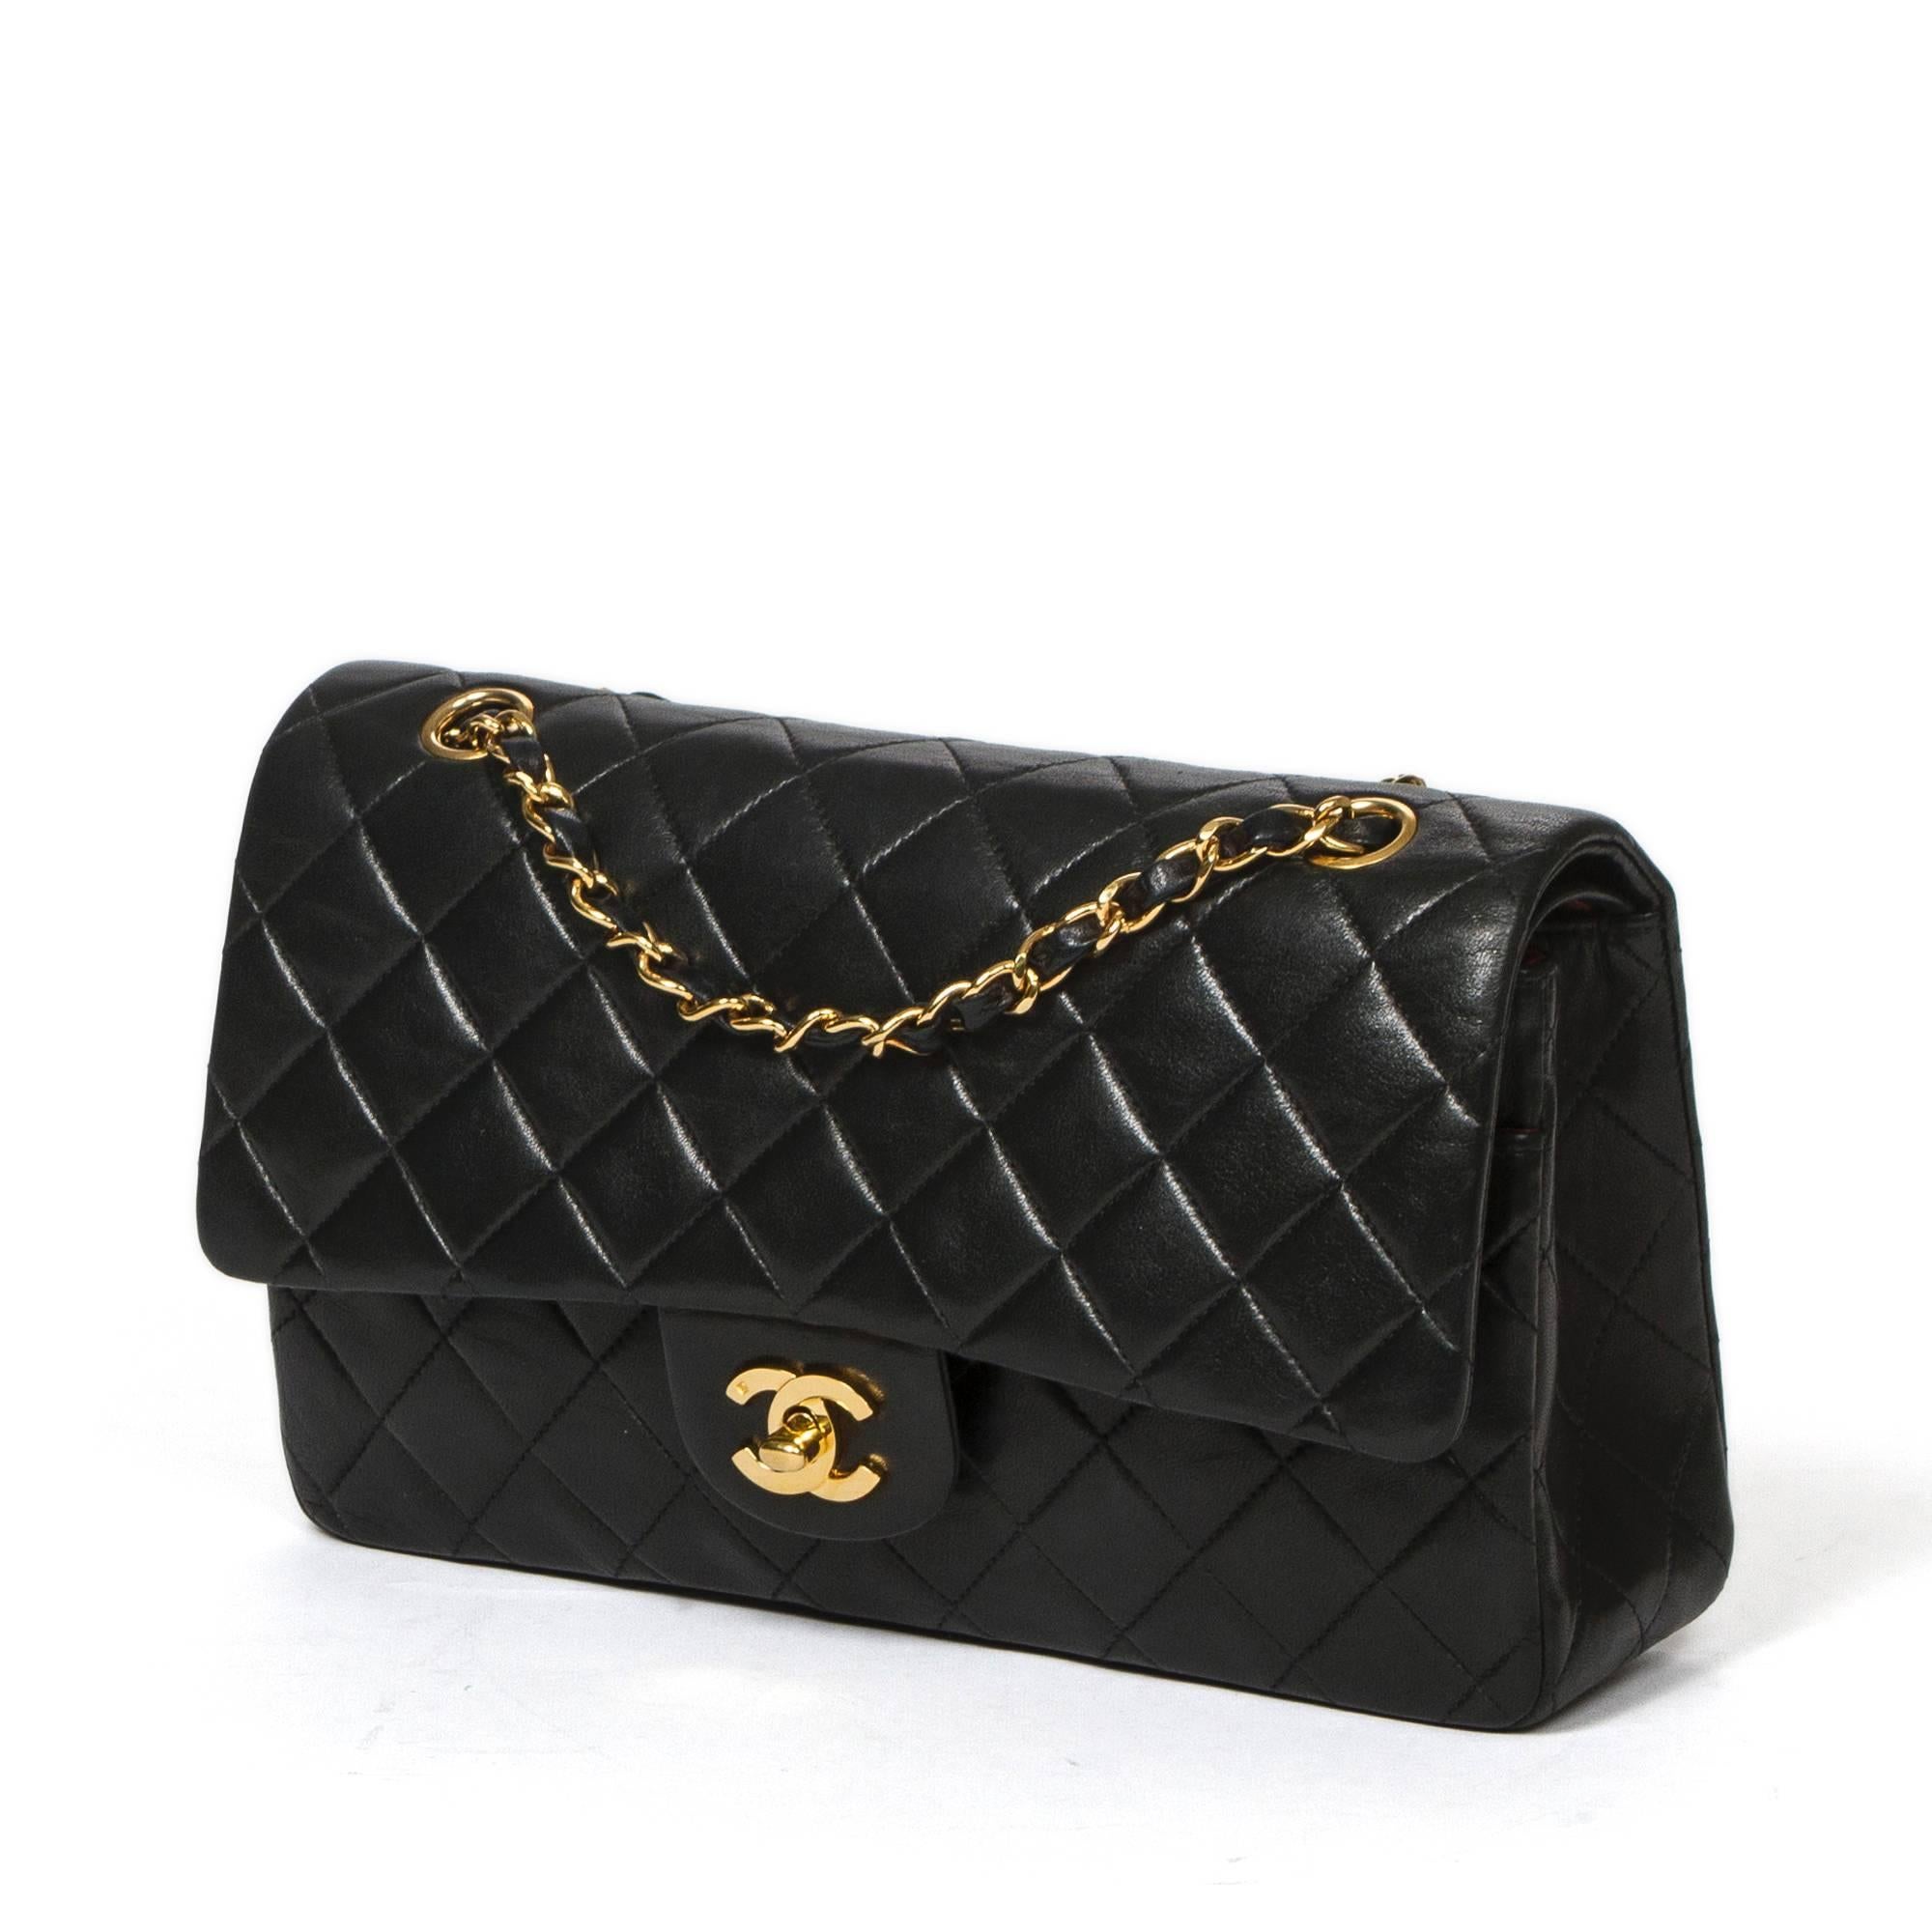 Classic Double Flap 26cm in black quilted lambskin with double chain strap interlaced with leather, gold tone CC turnlock. Back slip pocket. Burgundy leather lined interior with 3 compartments. Gold tone 